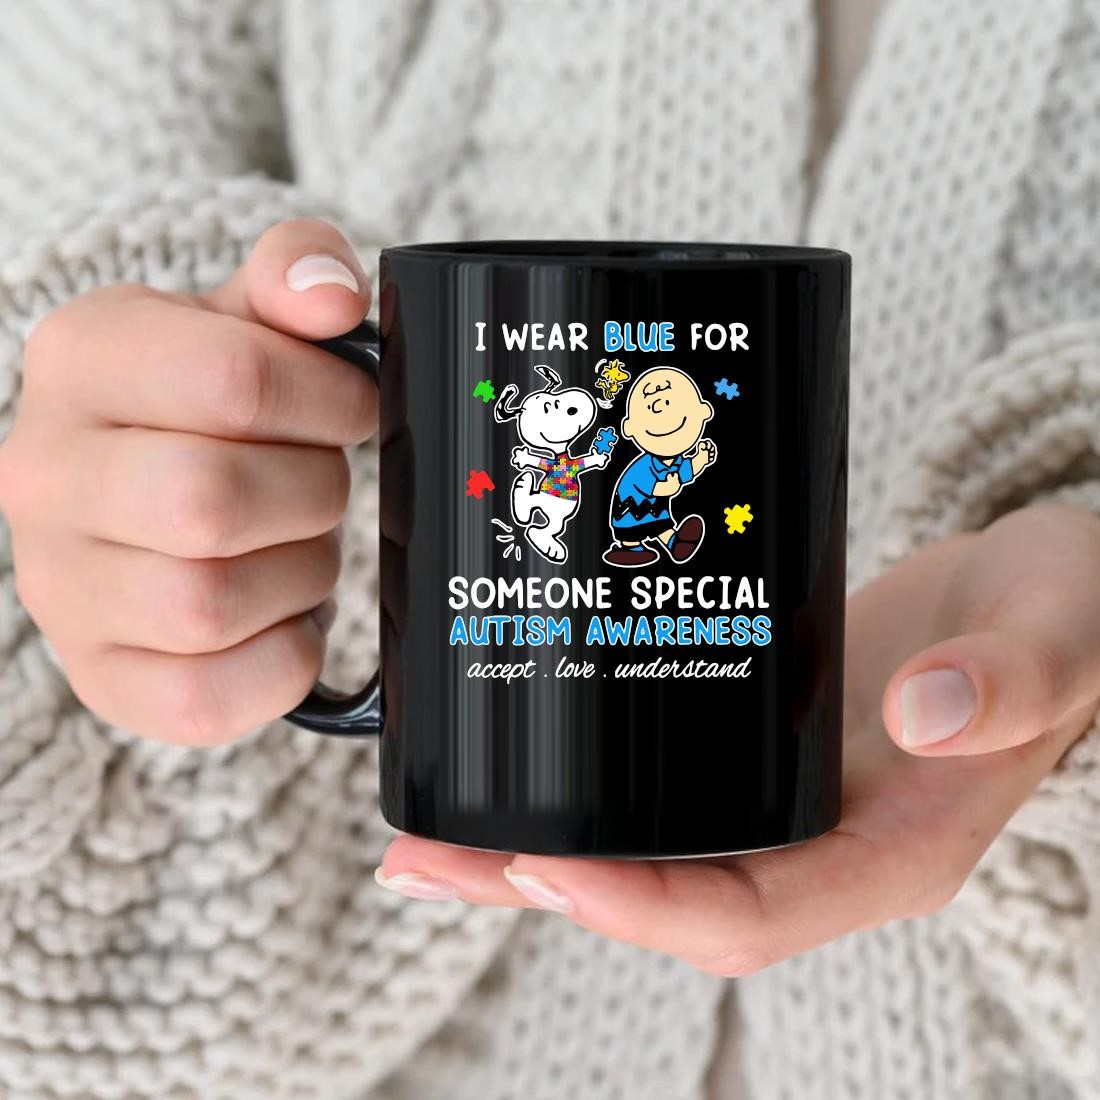 Original Snoopy Woodstock And Charlie Brown I Wear Blue For Someone Special Autism Awareness Accept Love Understand Mug